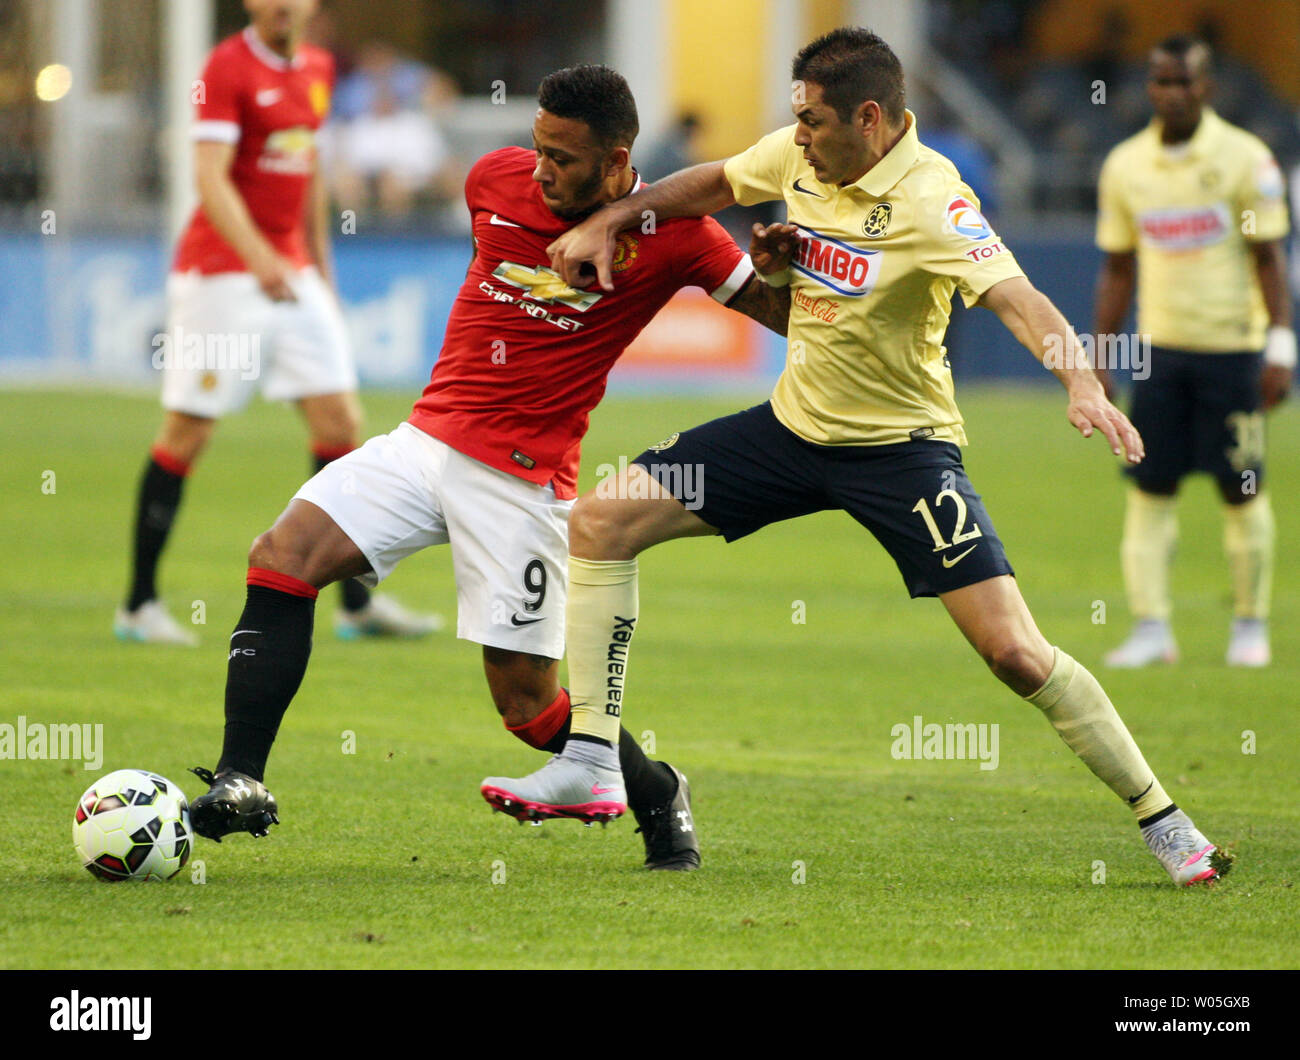 Manchester United's Memphis Depay (9) controls the ball against  Club America's Pablo Cesar Aguilar (12)  in the 2015 International Champions Cup match on July 17, 2015 in Seattle, Washington.  Manchester United beat Club America 1-0. Photo by Jim Bryant/UPI Stock Photo